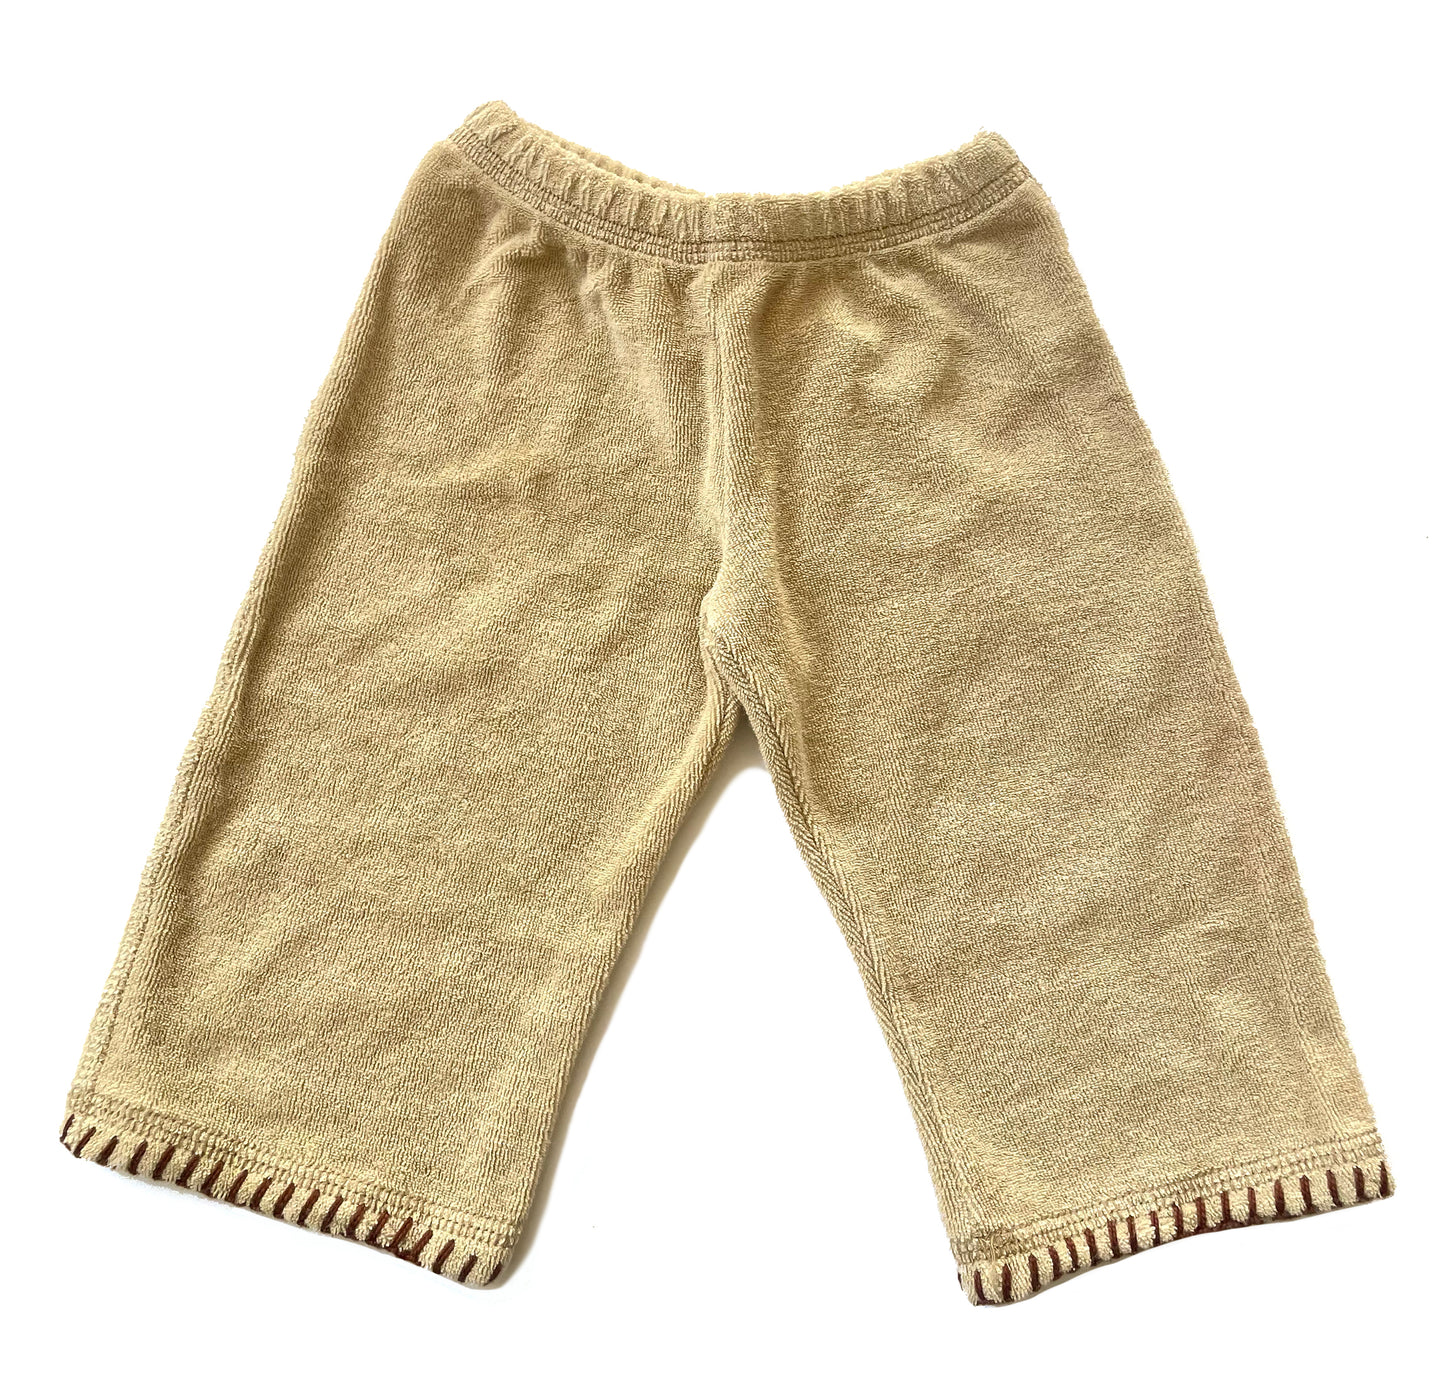 Cozy cover up 'aprés beach' set in the softest, cotton terry fabric with blanket stitch trim detail on both hoodie and elastic waist pant. Kanga pocket on hoodie for little treasures. Fabric color: Sand / Trim color: Chocolate 85% Cotton / 15% Poly Machine washable, cold. Dry on low heat. Made in California